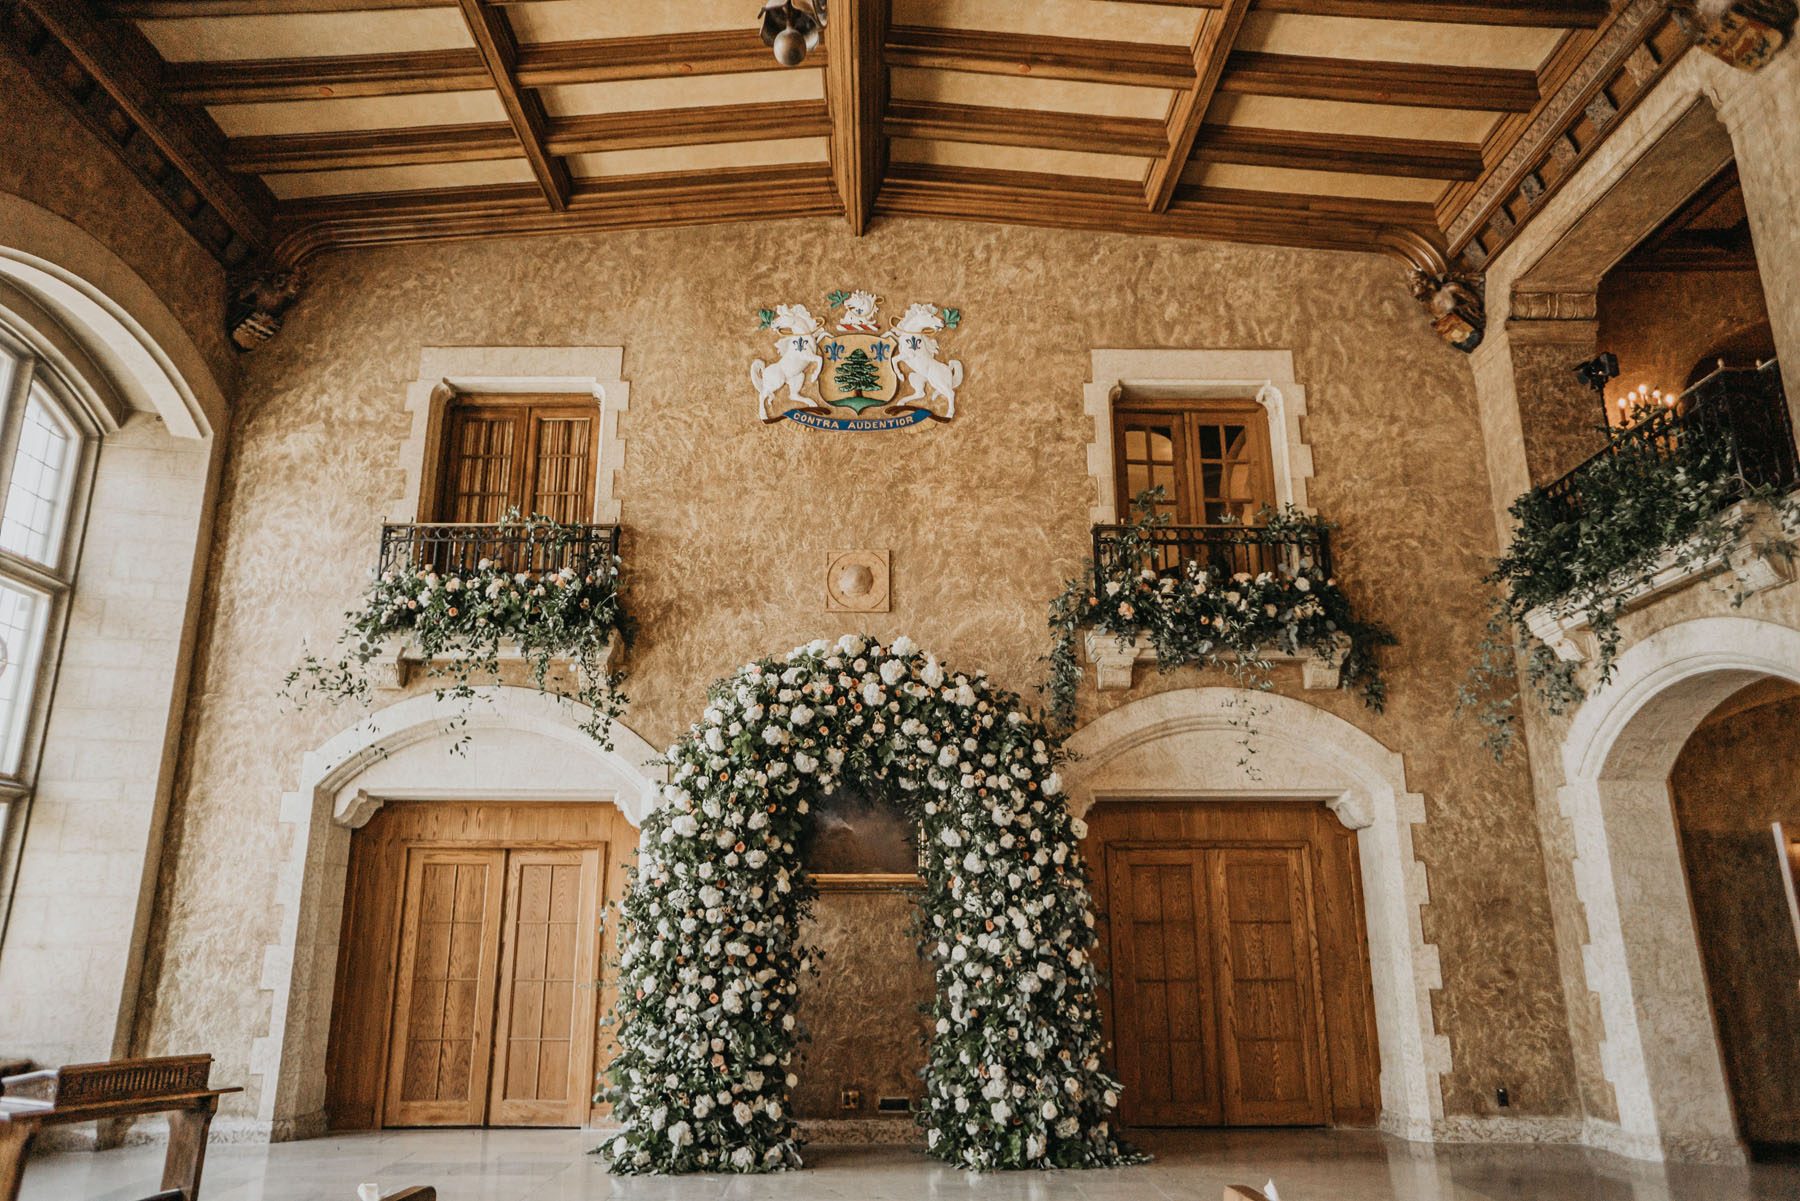 Grand wedding arch with blush white and greenery placed between 2 large doors below window balconies draped with florals